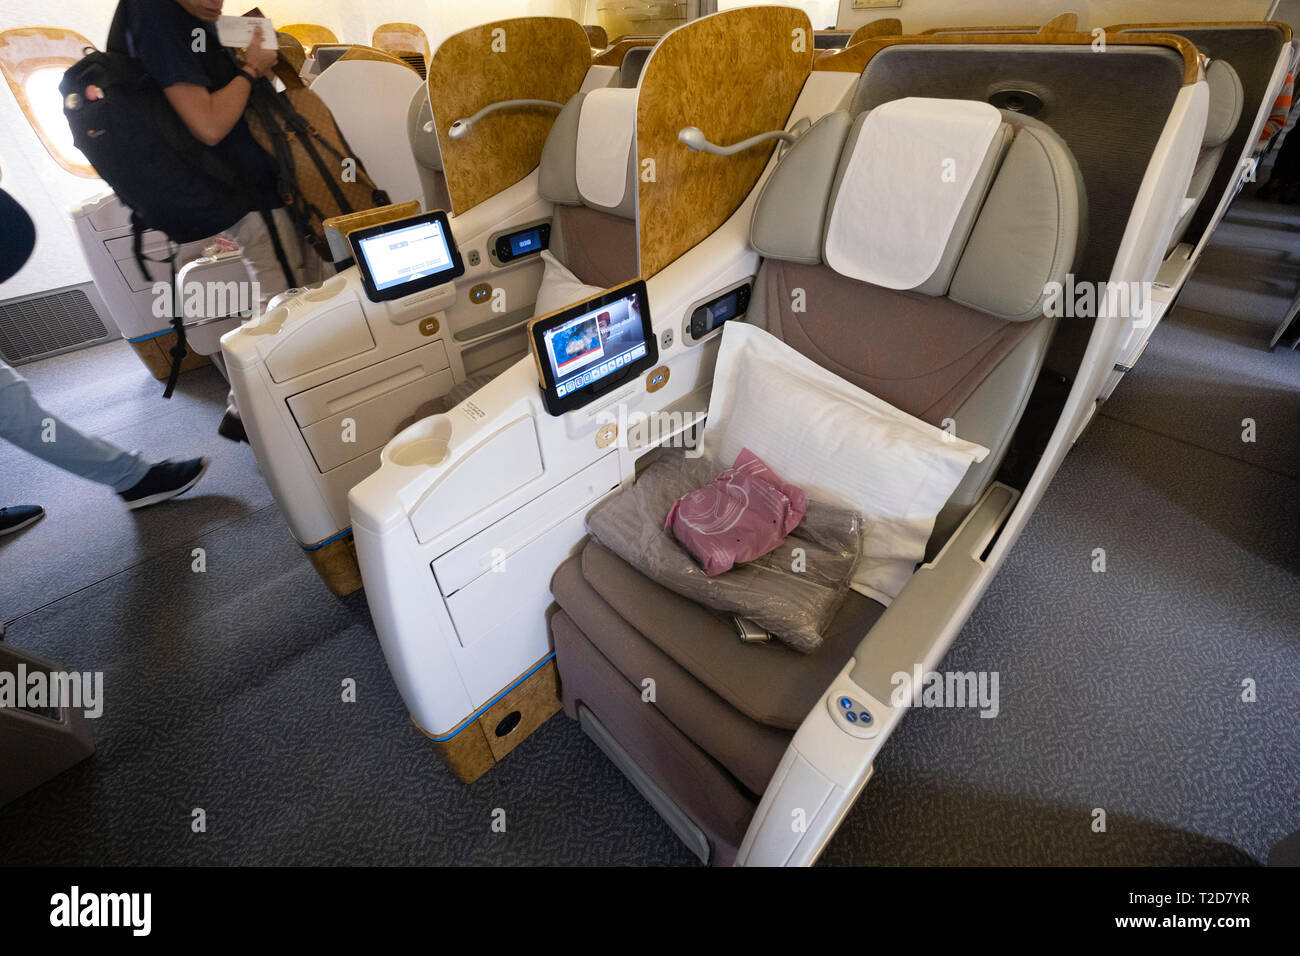 Spacious business class empty seats with pillows on a Emirates commercial flight airplane Stock Photo